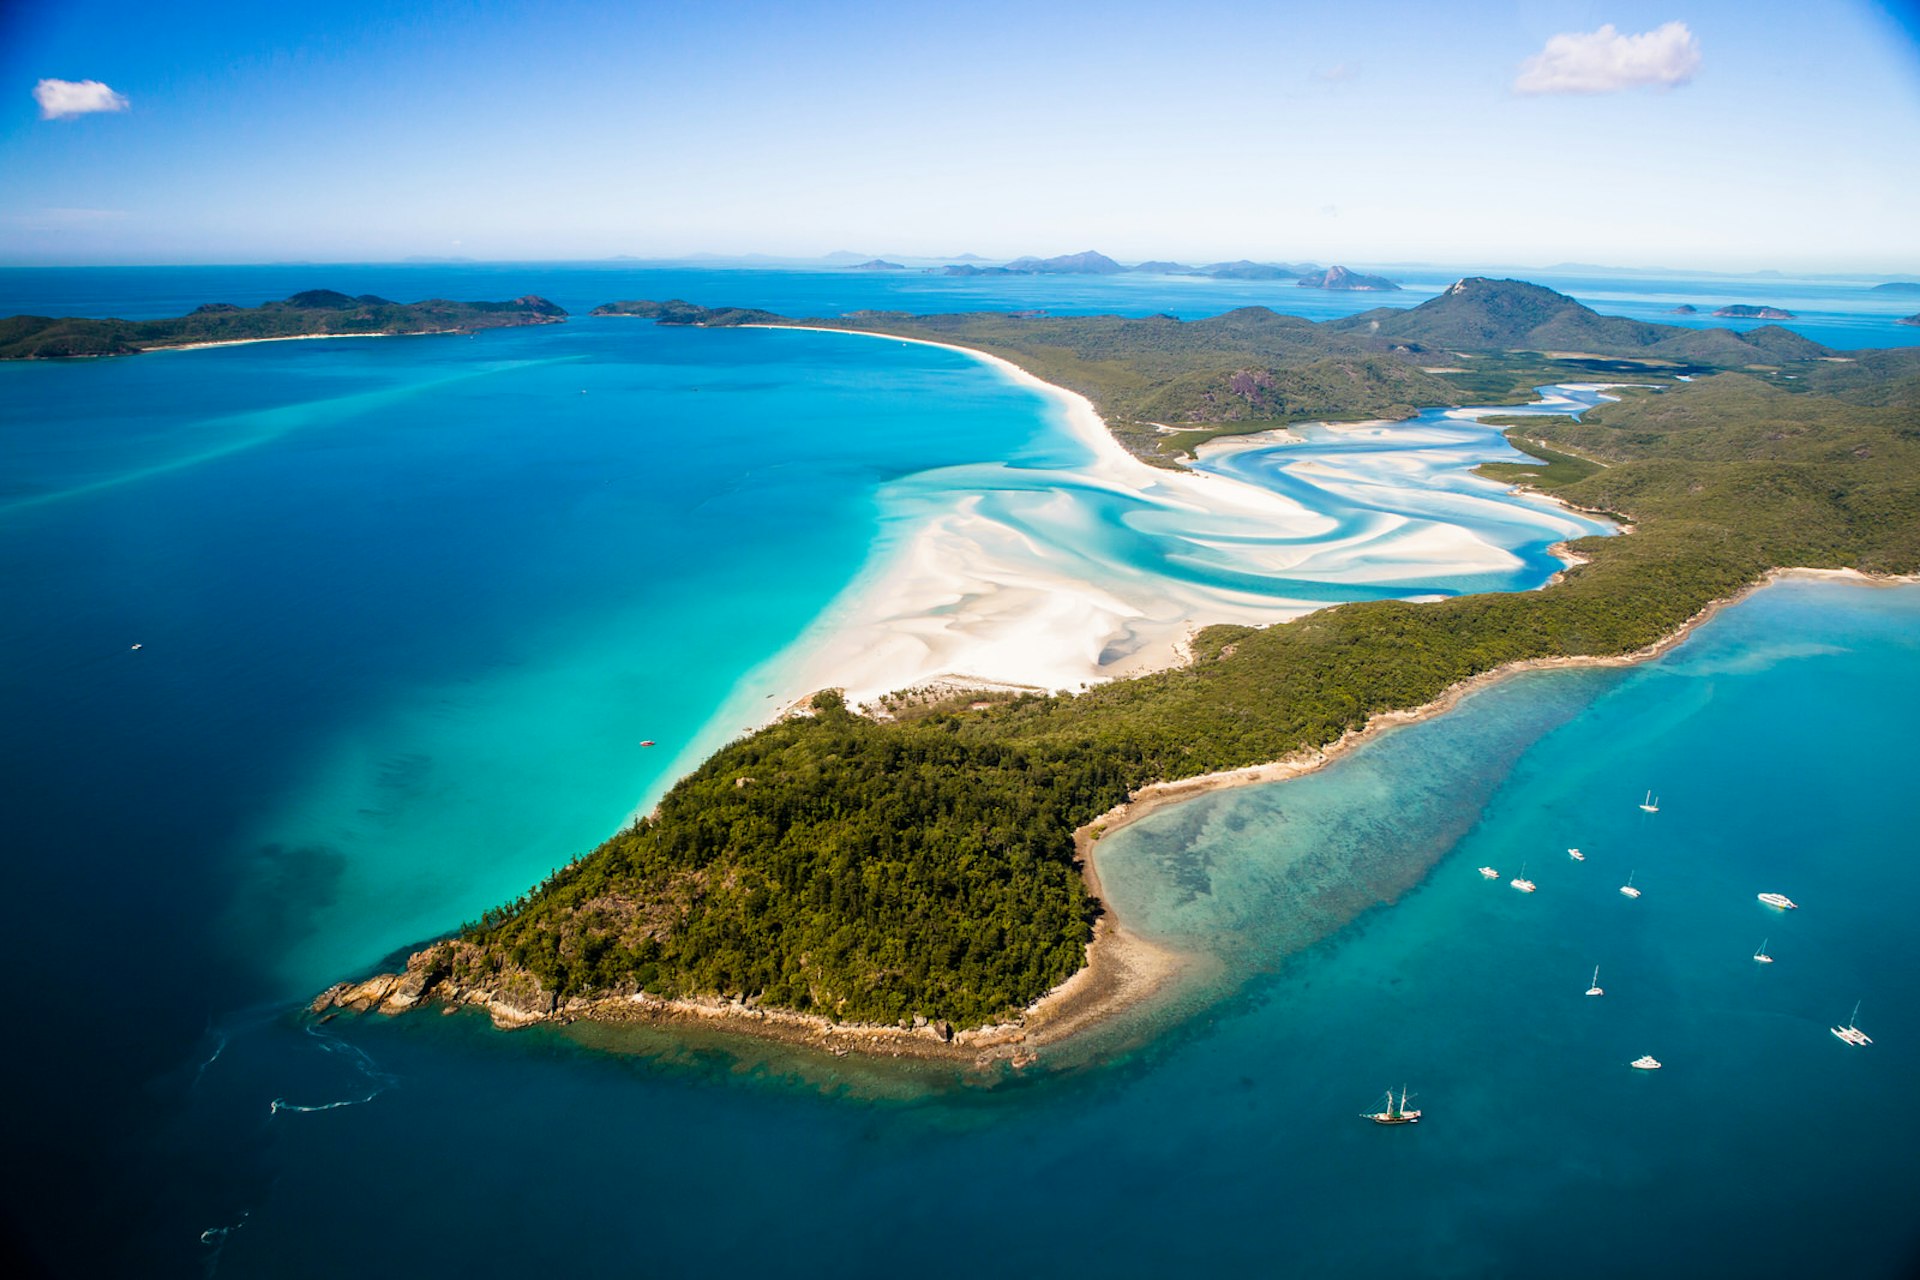 A small peninsula covered in vegetation in the foreground with the turquoise swirls of sea mixing with the white sands at Whitehaven Beach behind